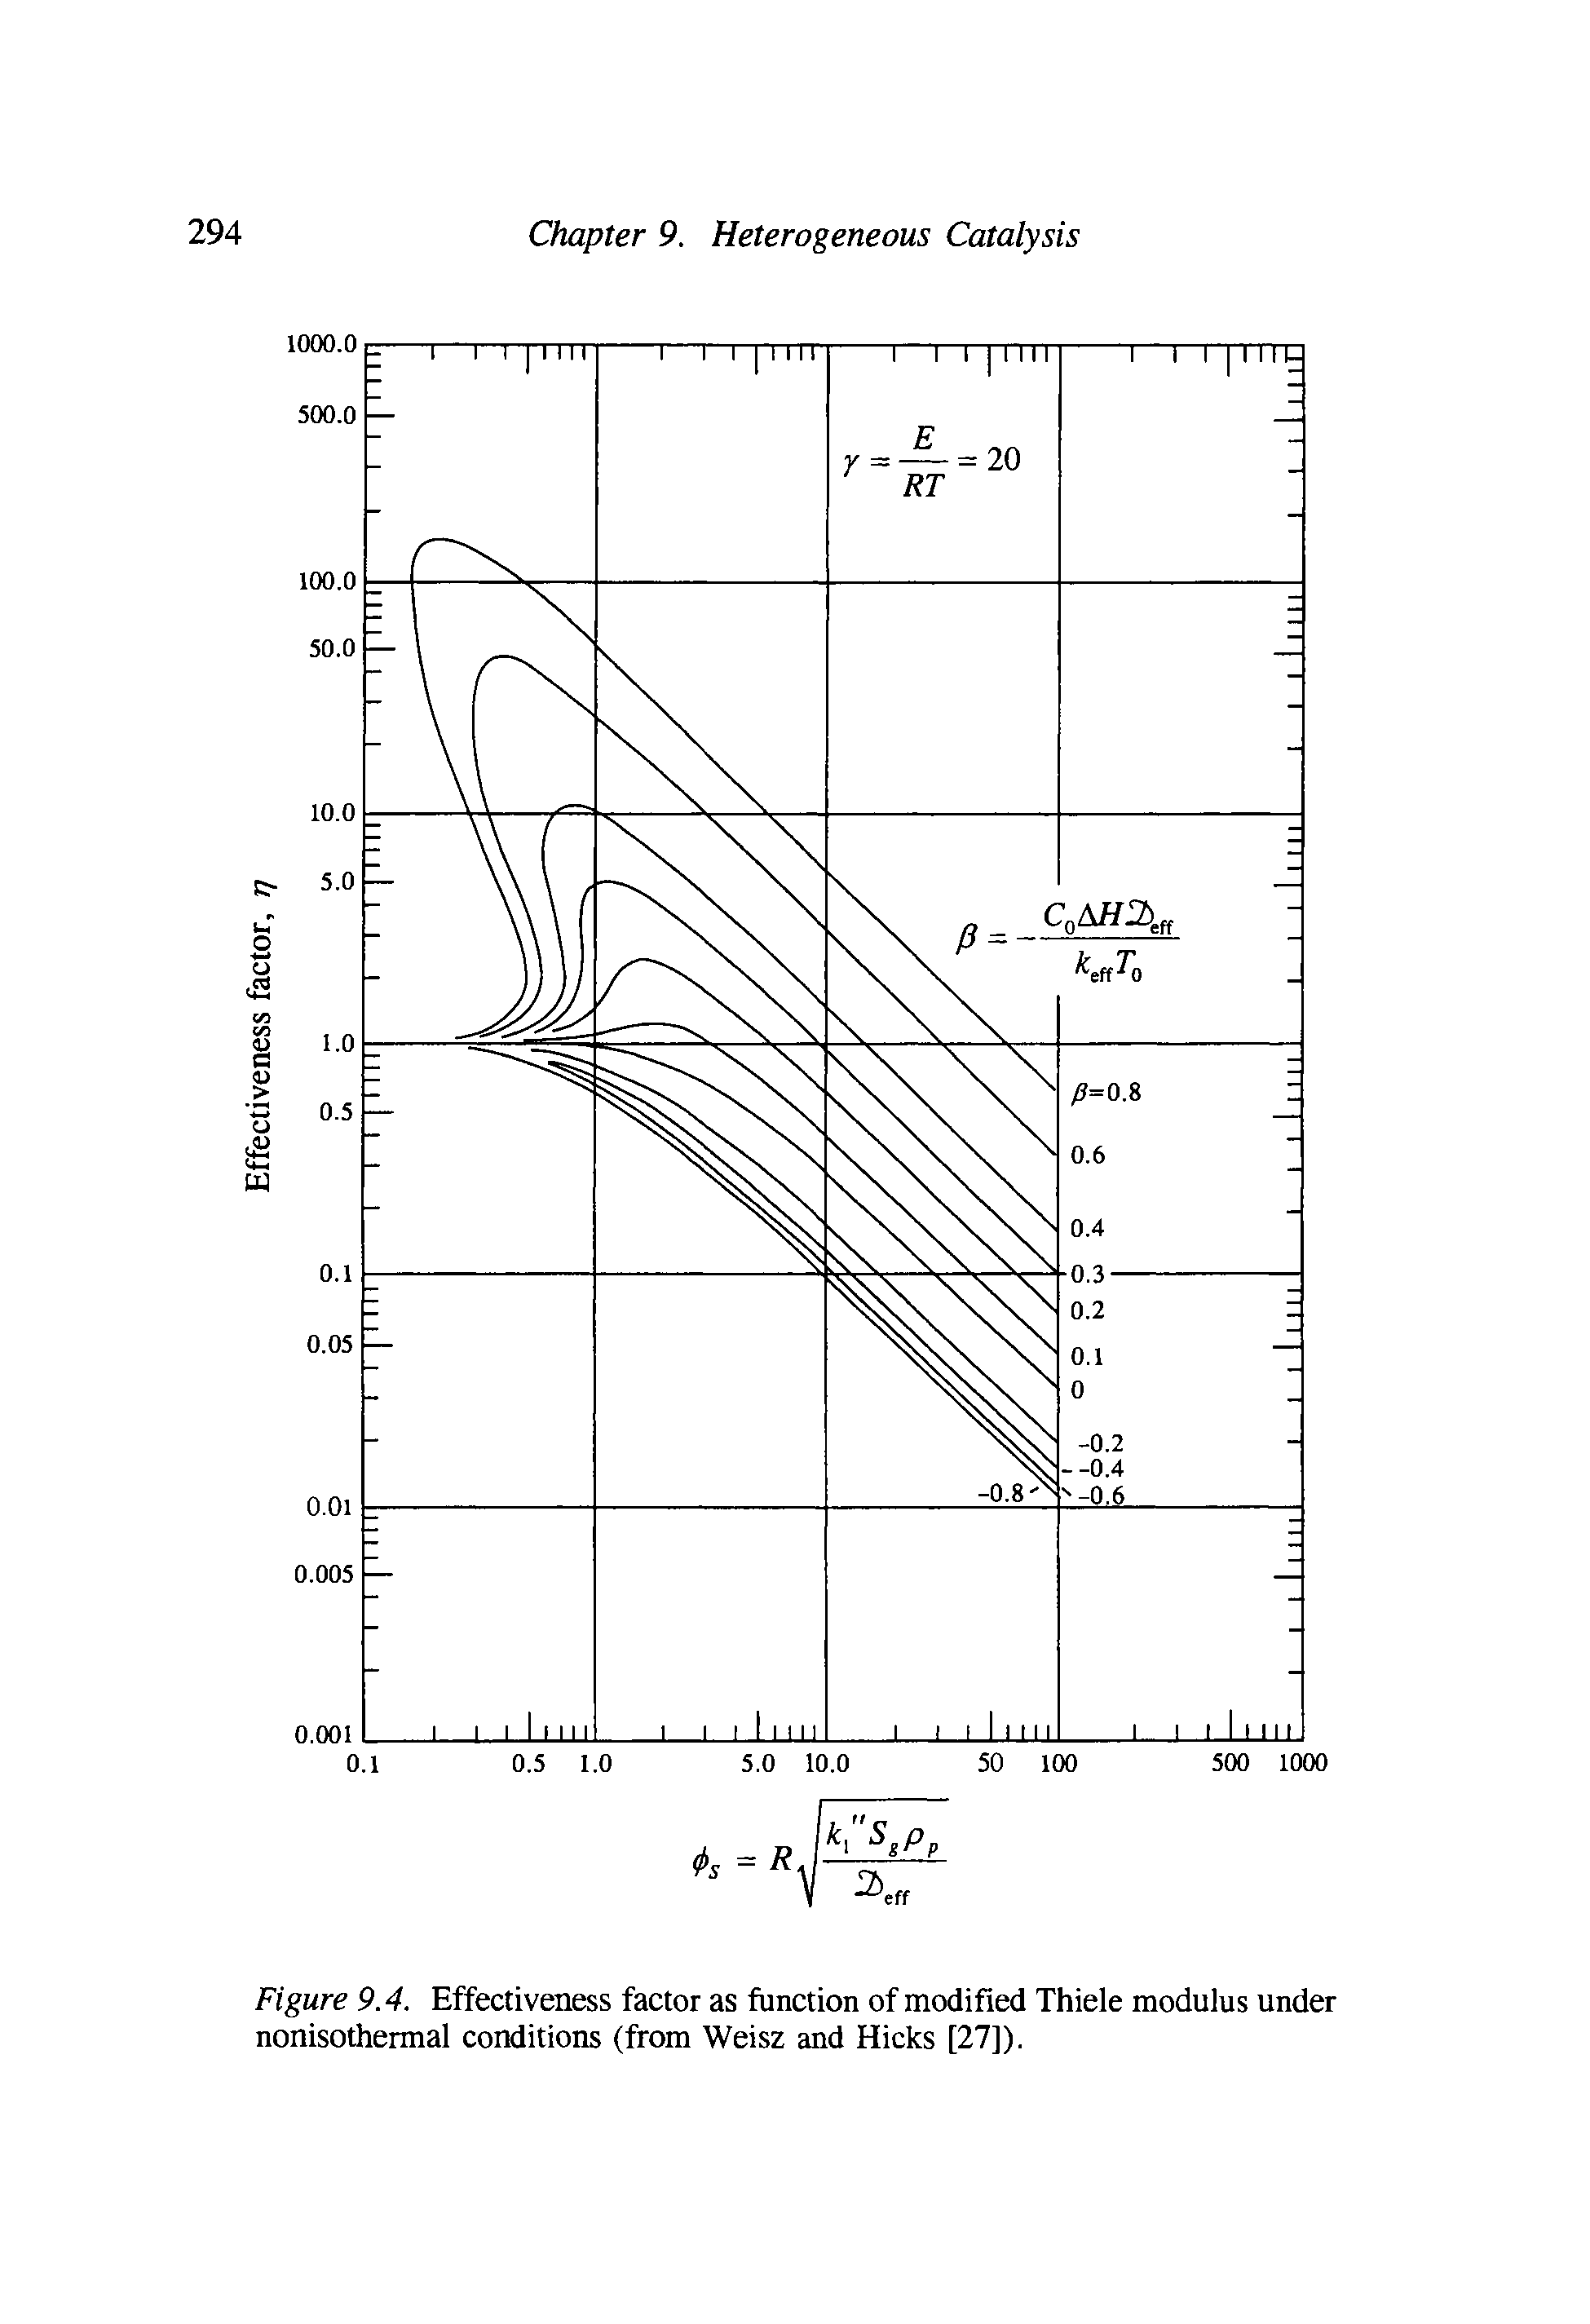 Figure 9.4. Effectiveness factor as function of modified Thiele modulus under nonisothermal conditions (from Weisz and Hicks [27]).